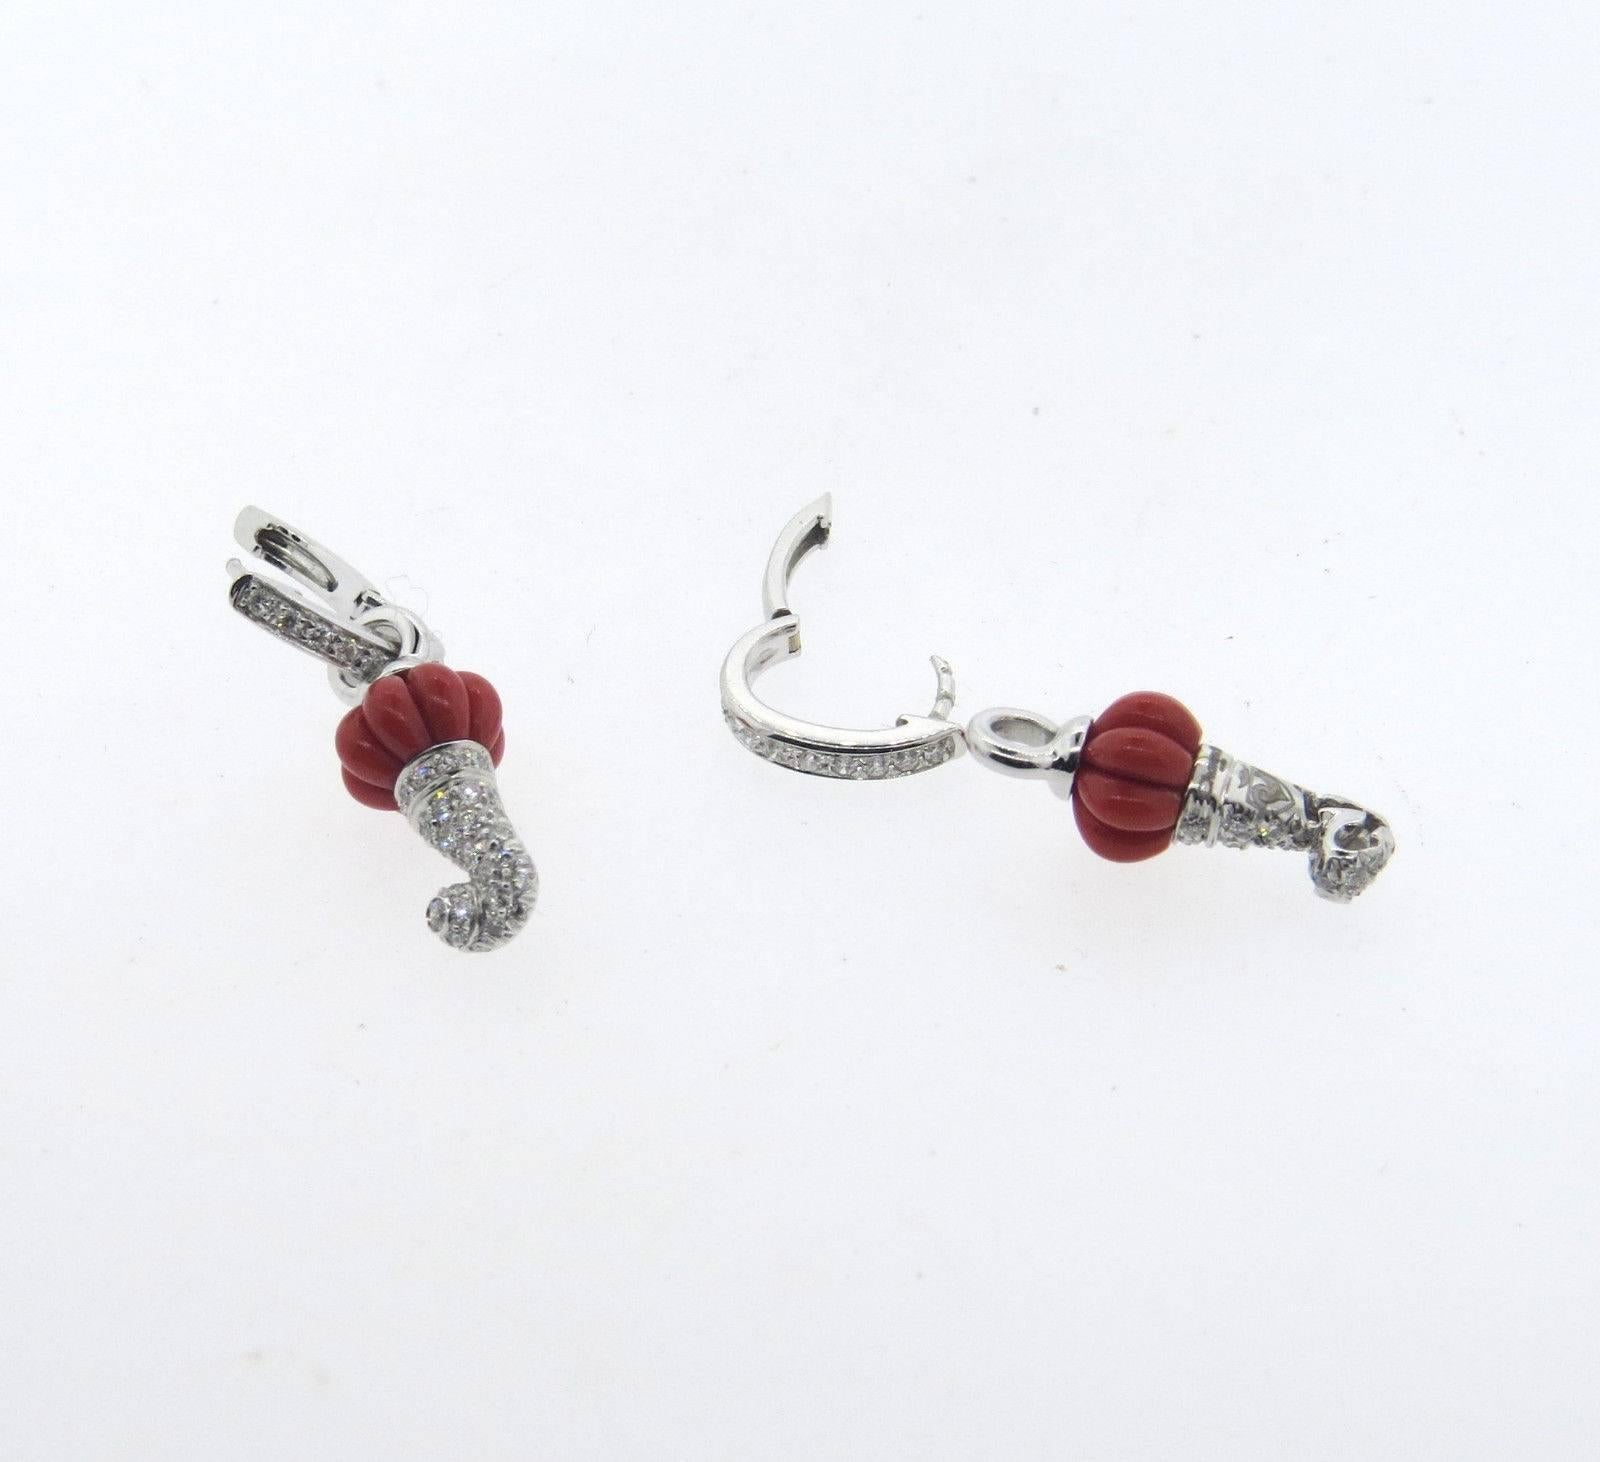 A pair of 18k white gold earrings set with carved coral and 0.80ctw of FG/VS diamonds.  Crafted by Chantecler, the earrings are 34mm long ( drops can be removed - earrings can be worn as hoops alone).  Marked: Chantecler, Italy, 18kt 750.  The